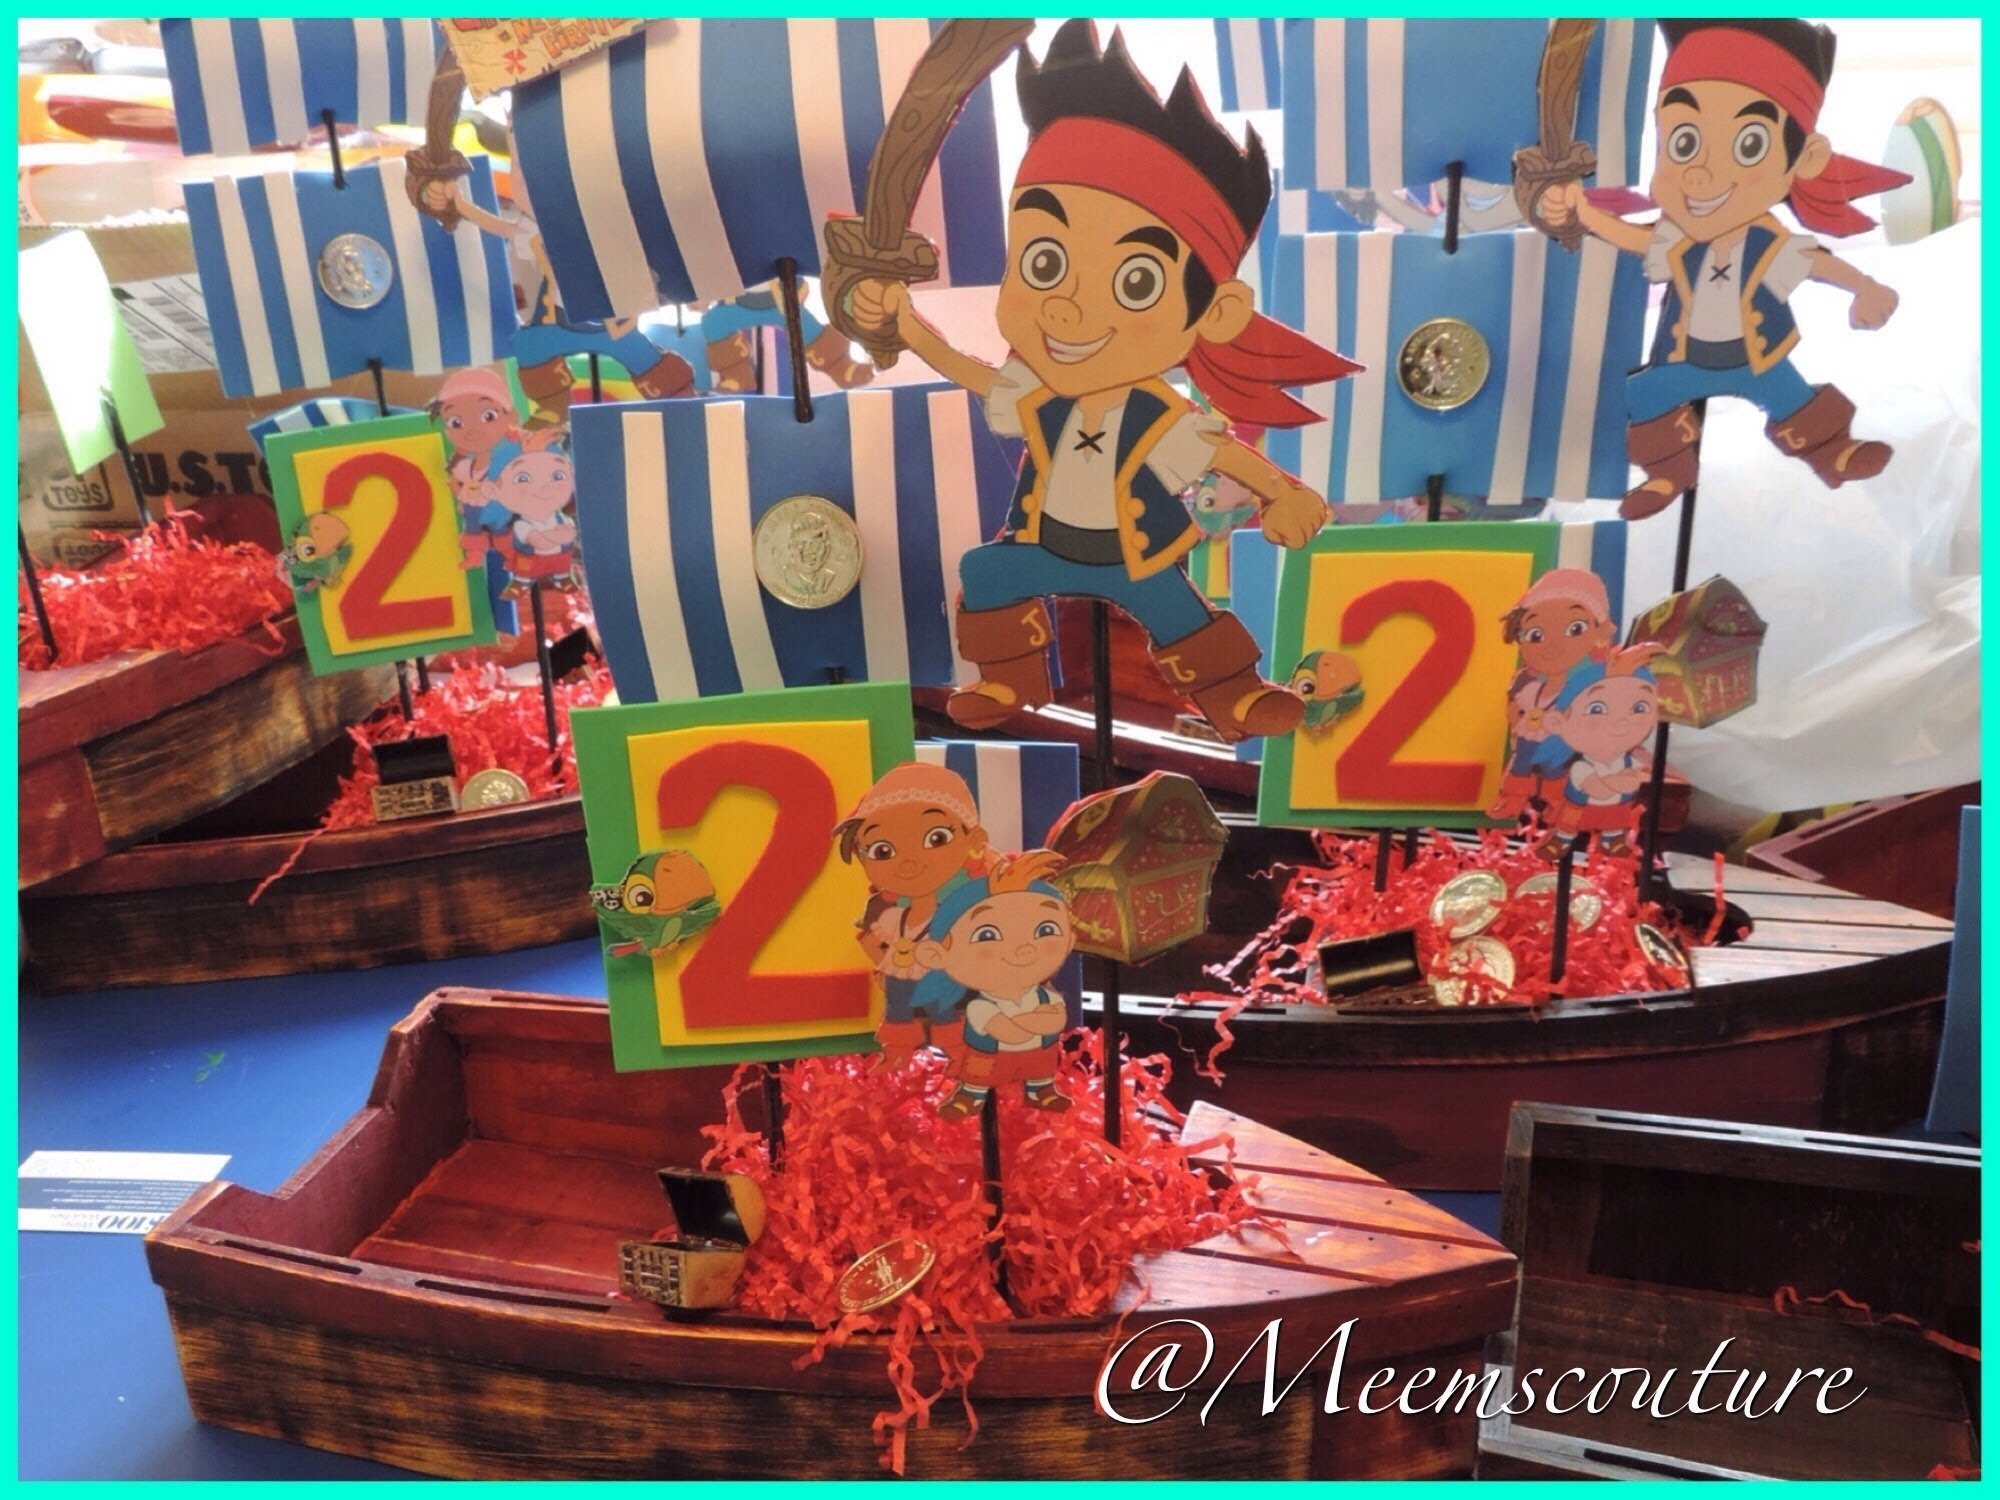 10 Gorgeous Jake And The Neverland Pirates Party Ideas diy jake and the neverland pirates party center pieces youtube 7 2022